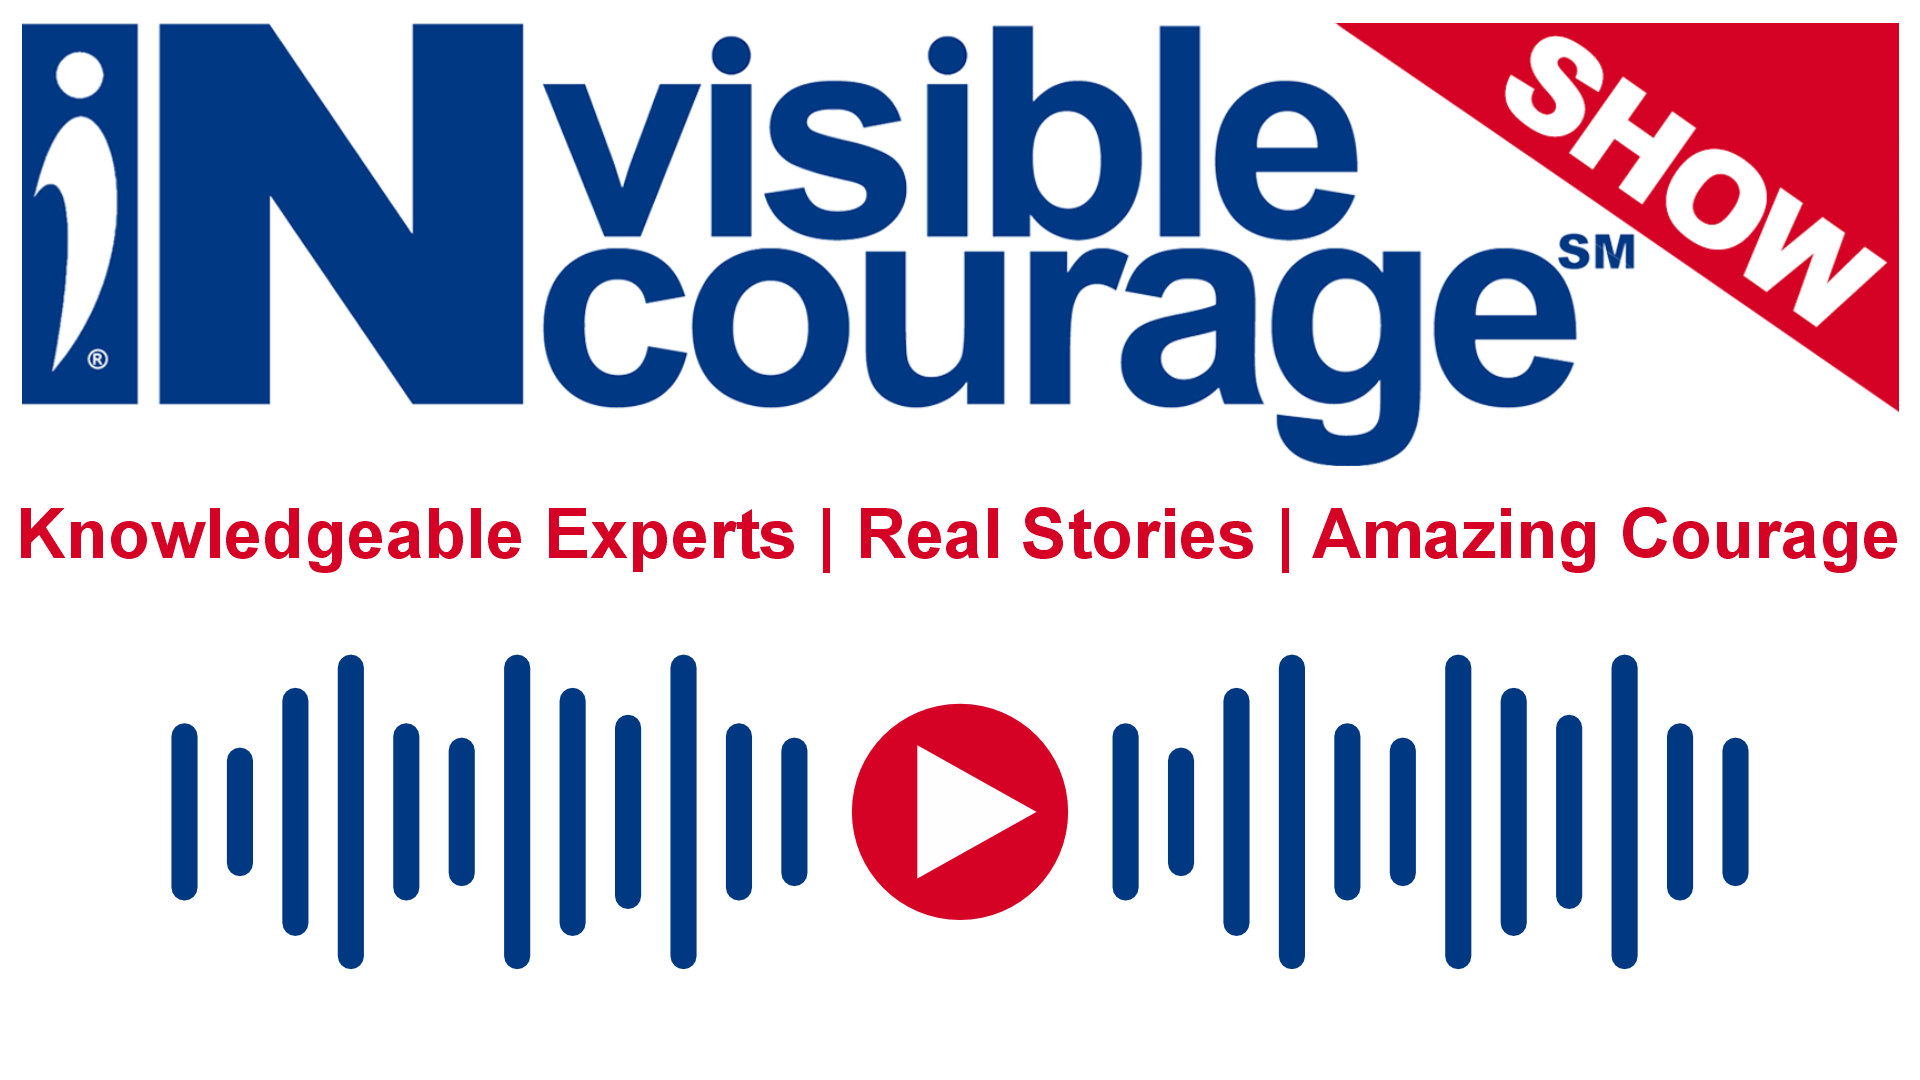 InVisible InCourage Show - Invisible Disabilities Association